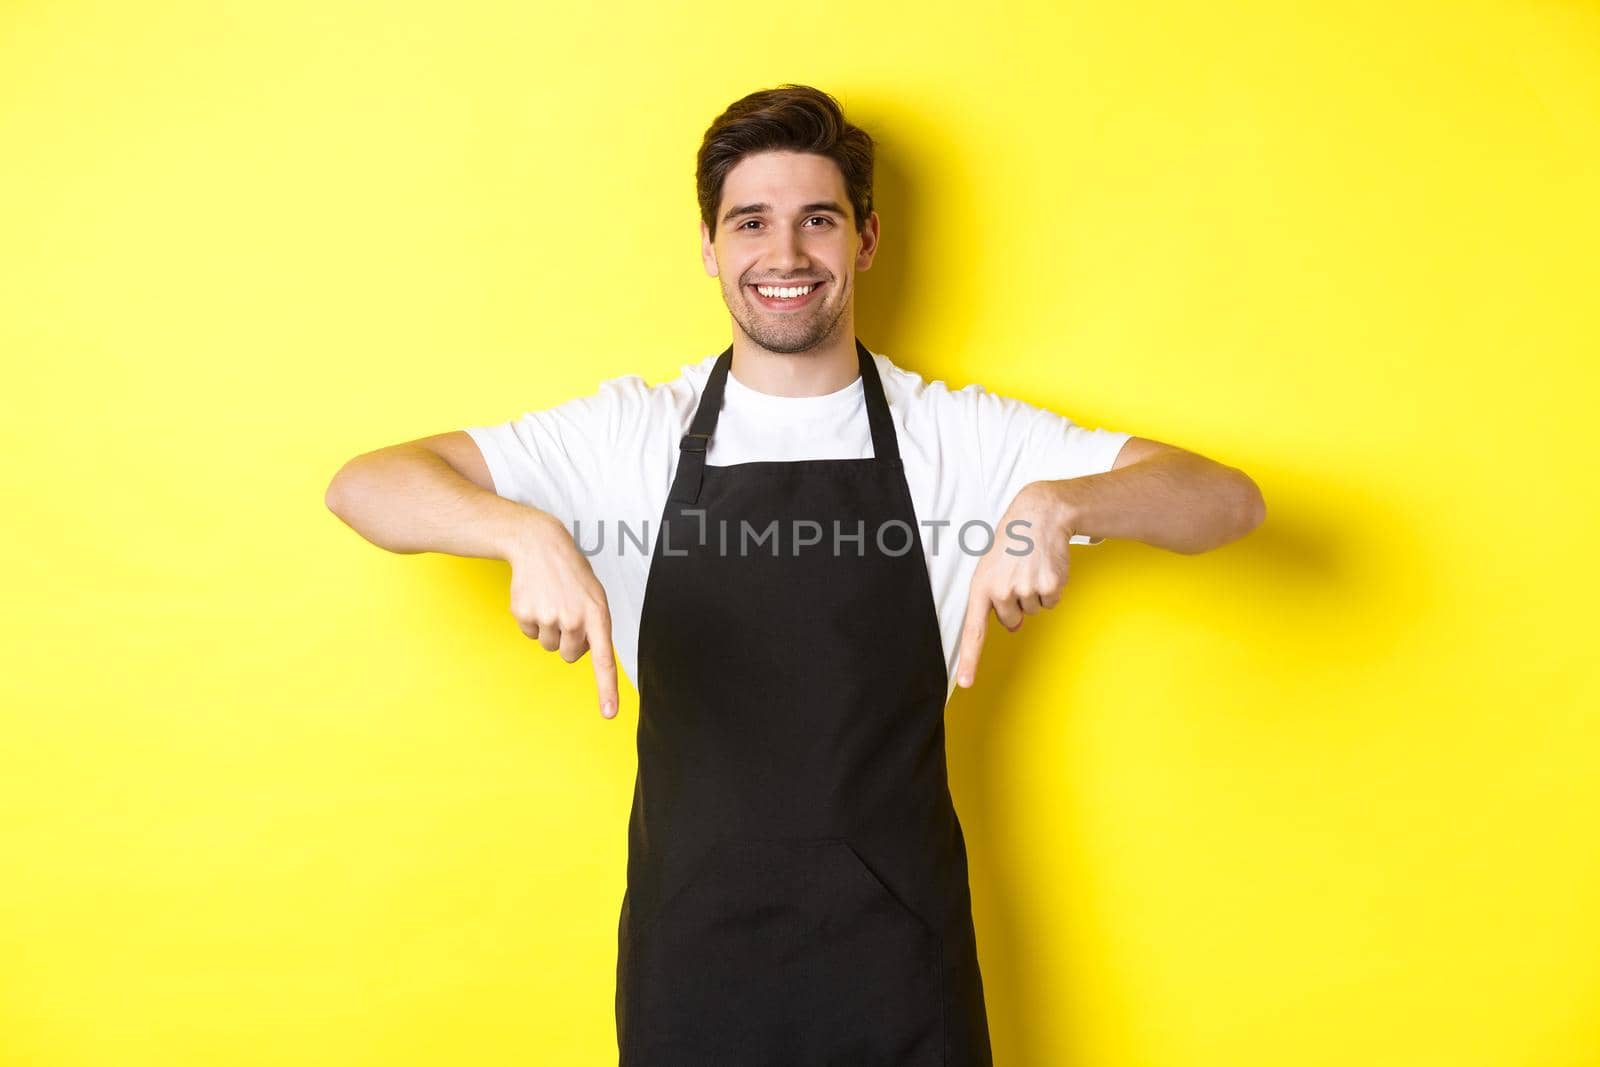 Friendly barista in black apron pointing fingers down, showing your logo banner, standing over yellow background.